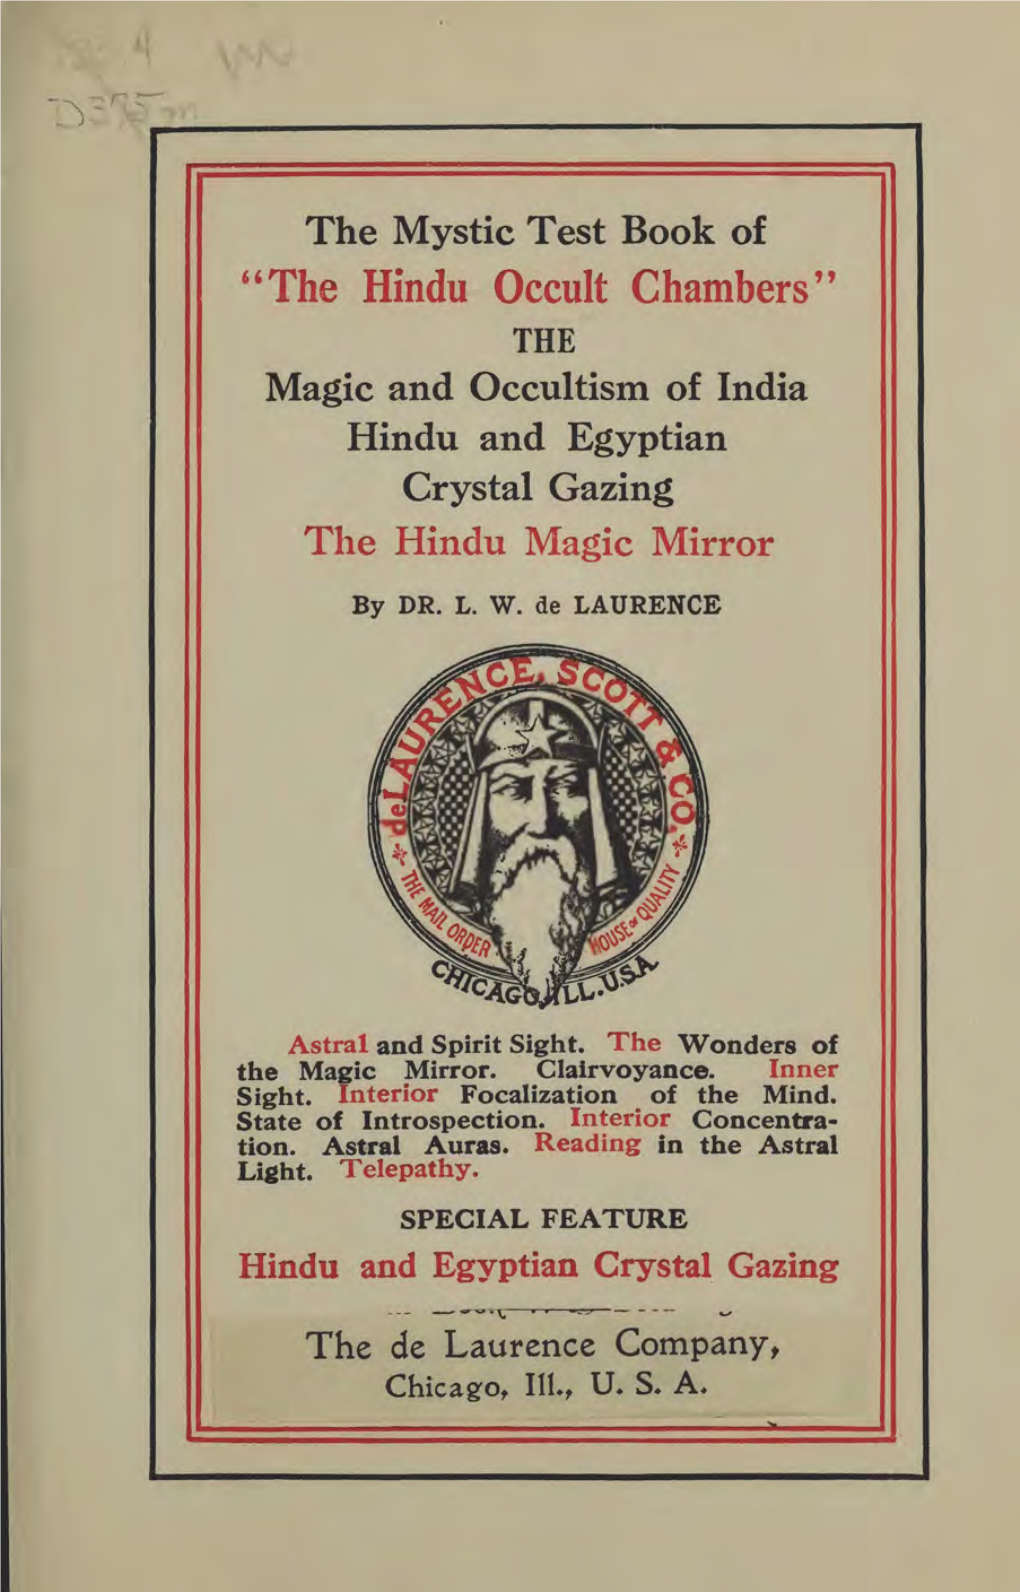 The Mystic Test Book of "The Hindu Occult Chambers" : the Magic And